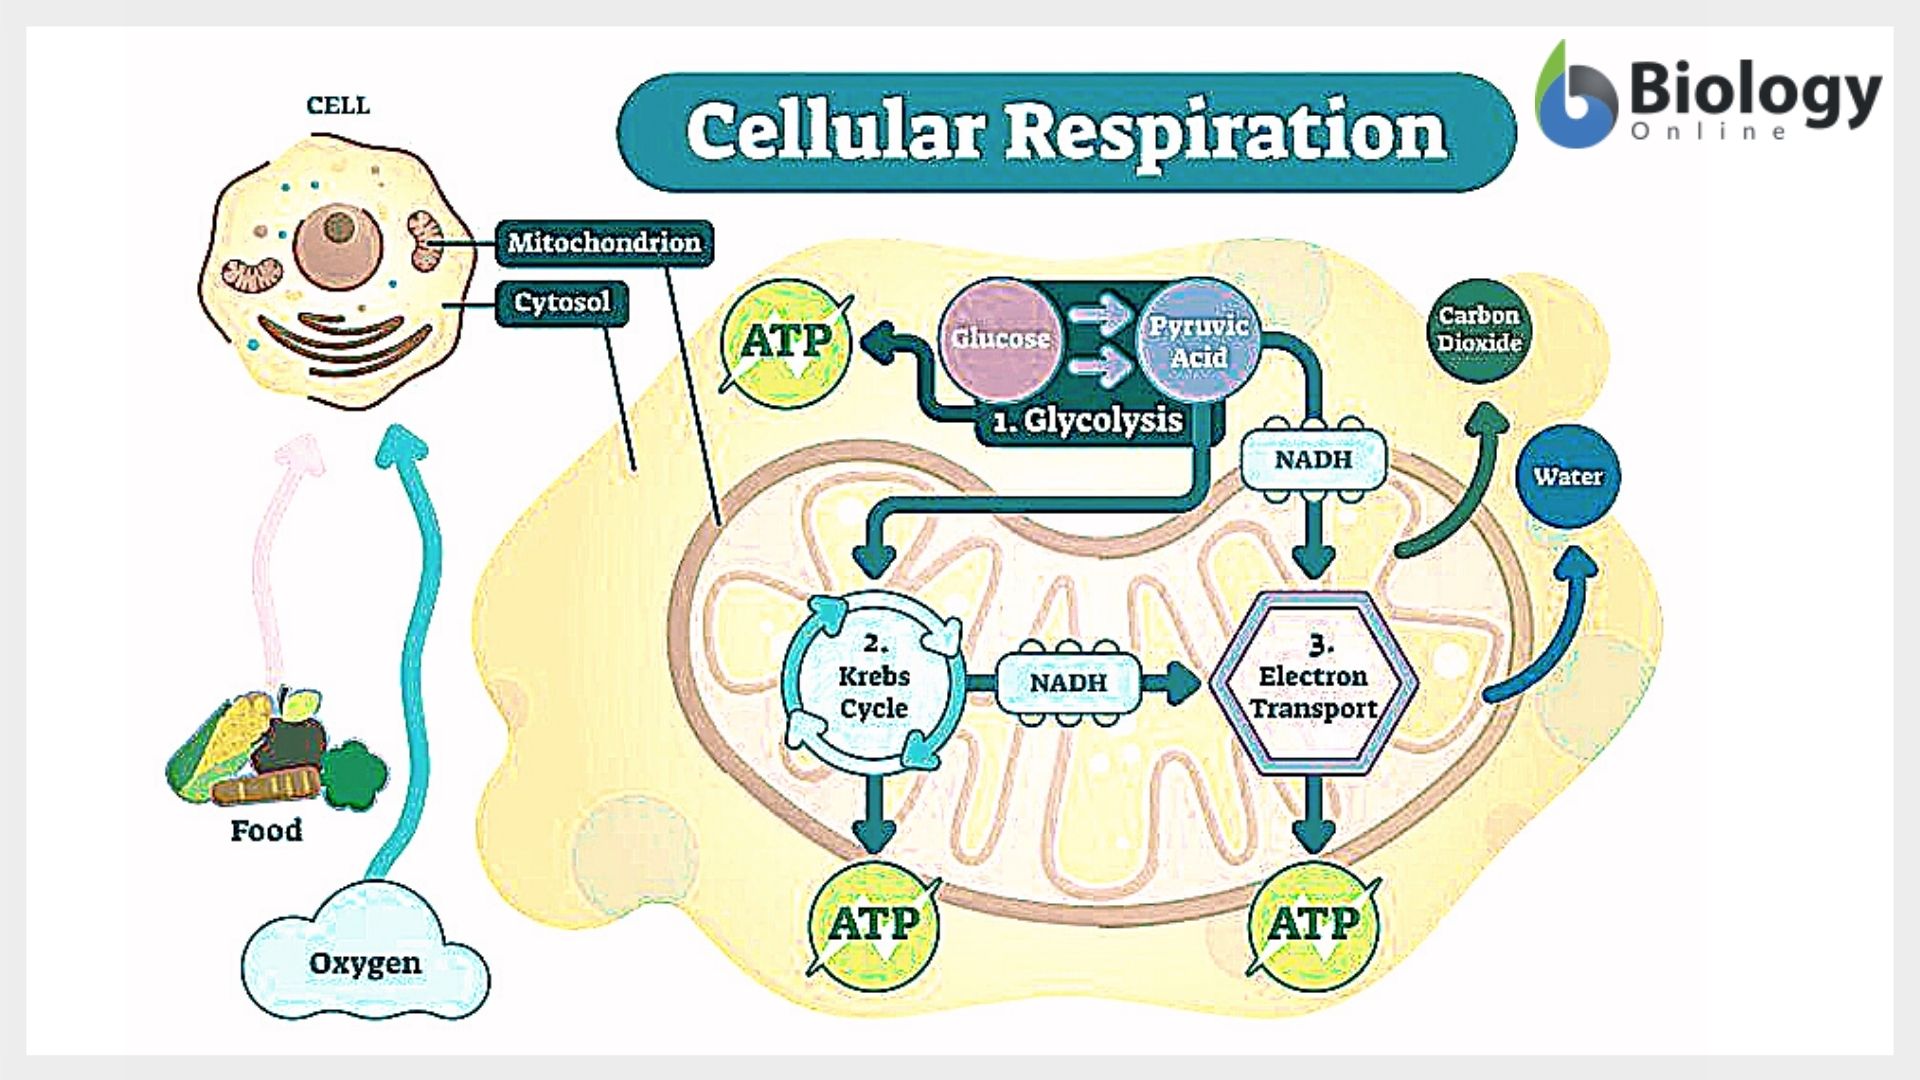 Cellular respiration - Definition and Examples - Biology Online Dictionary